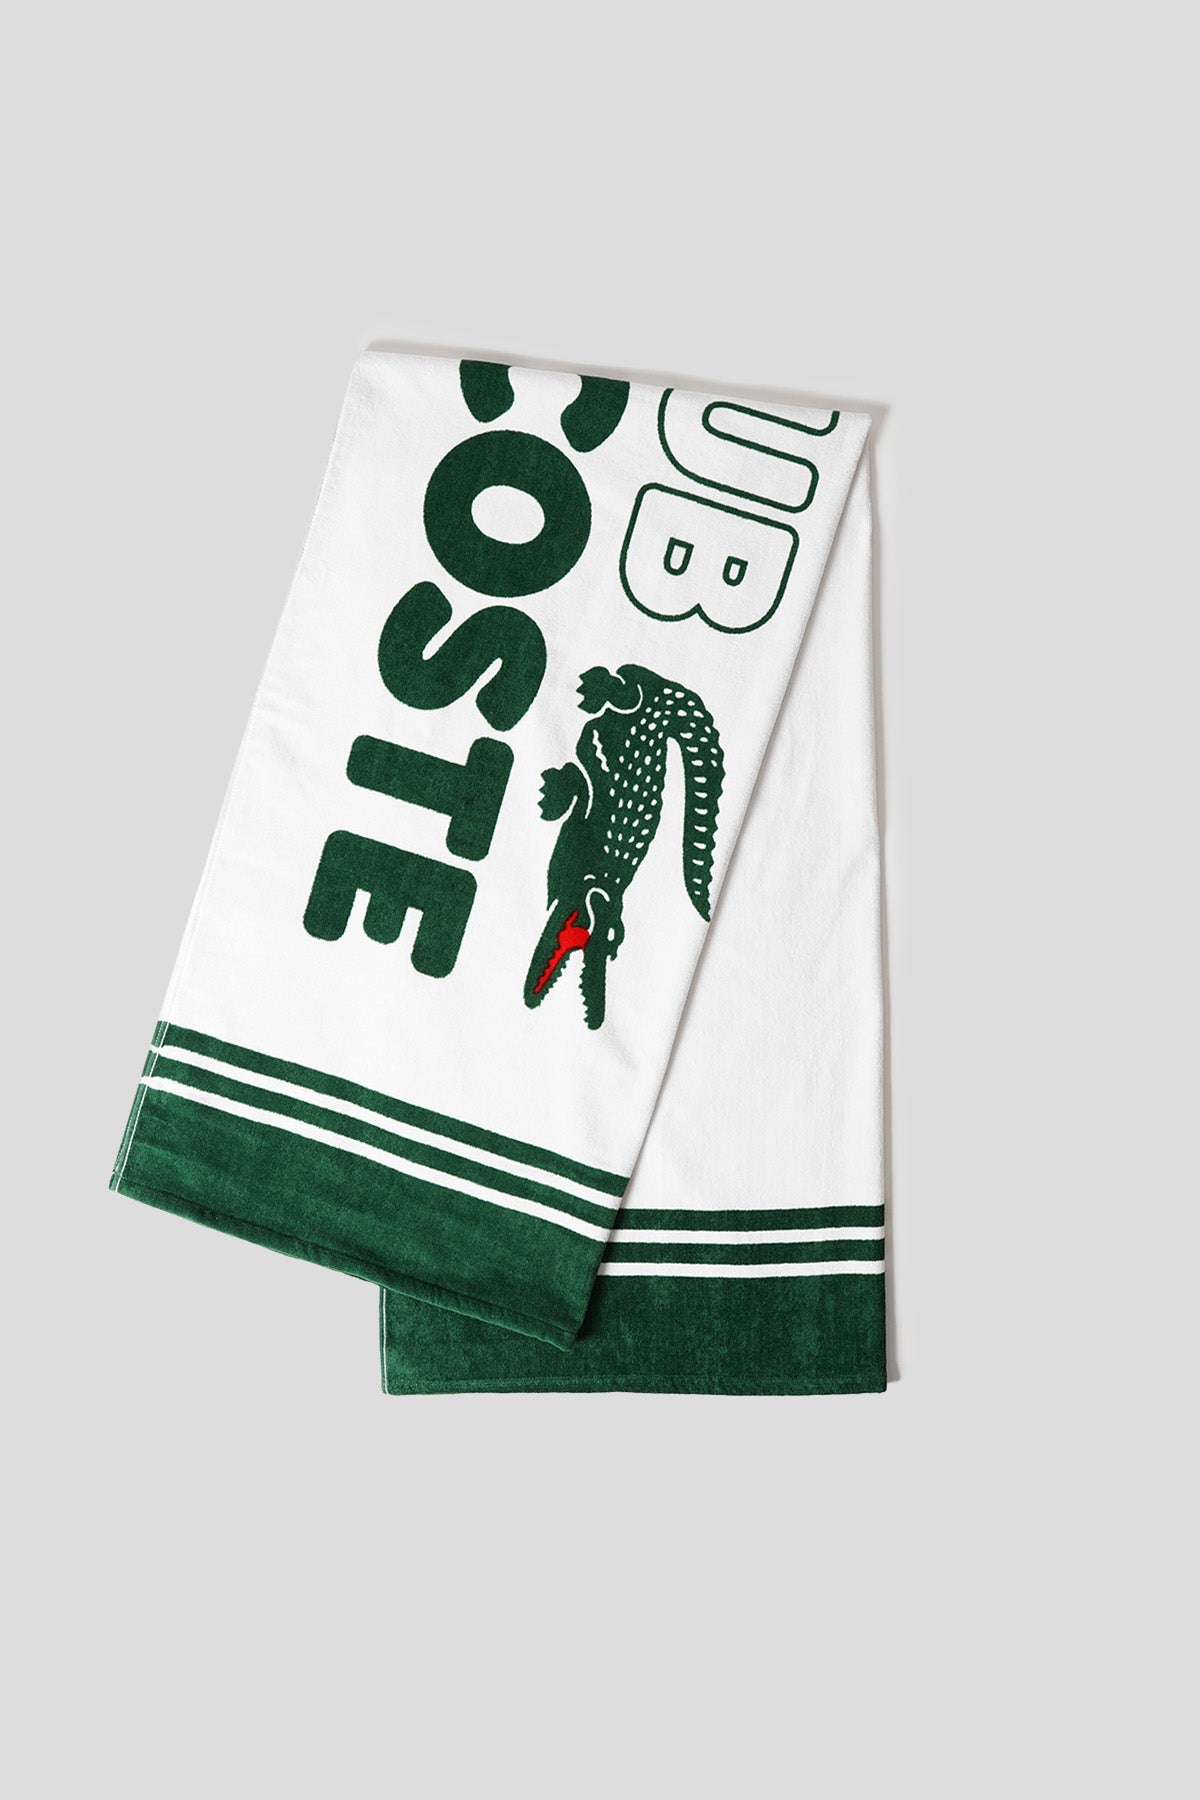 Lacoste x Sporty & Rich Beach Towel - All Men's Accessories - New